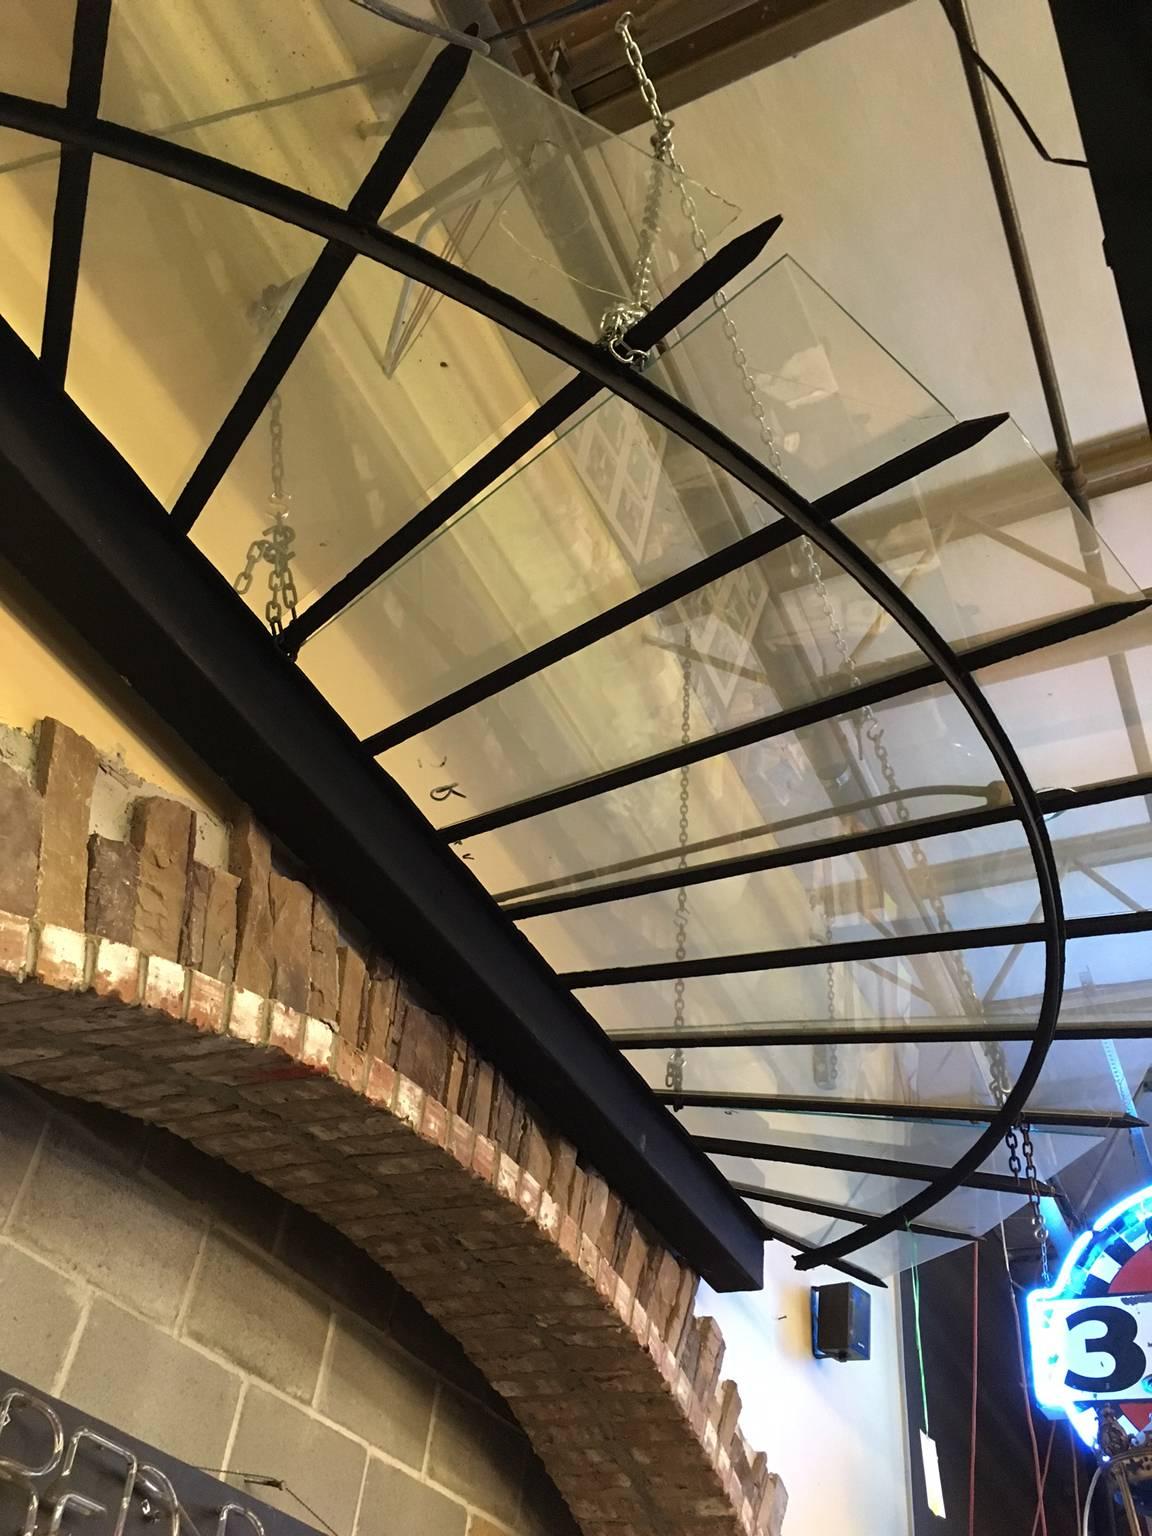 This half round wrought iron canopy is from Paris, circa 1910s. Glass has been replaced with tempered safety glass, but the iron is original.